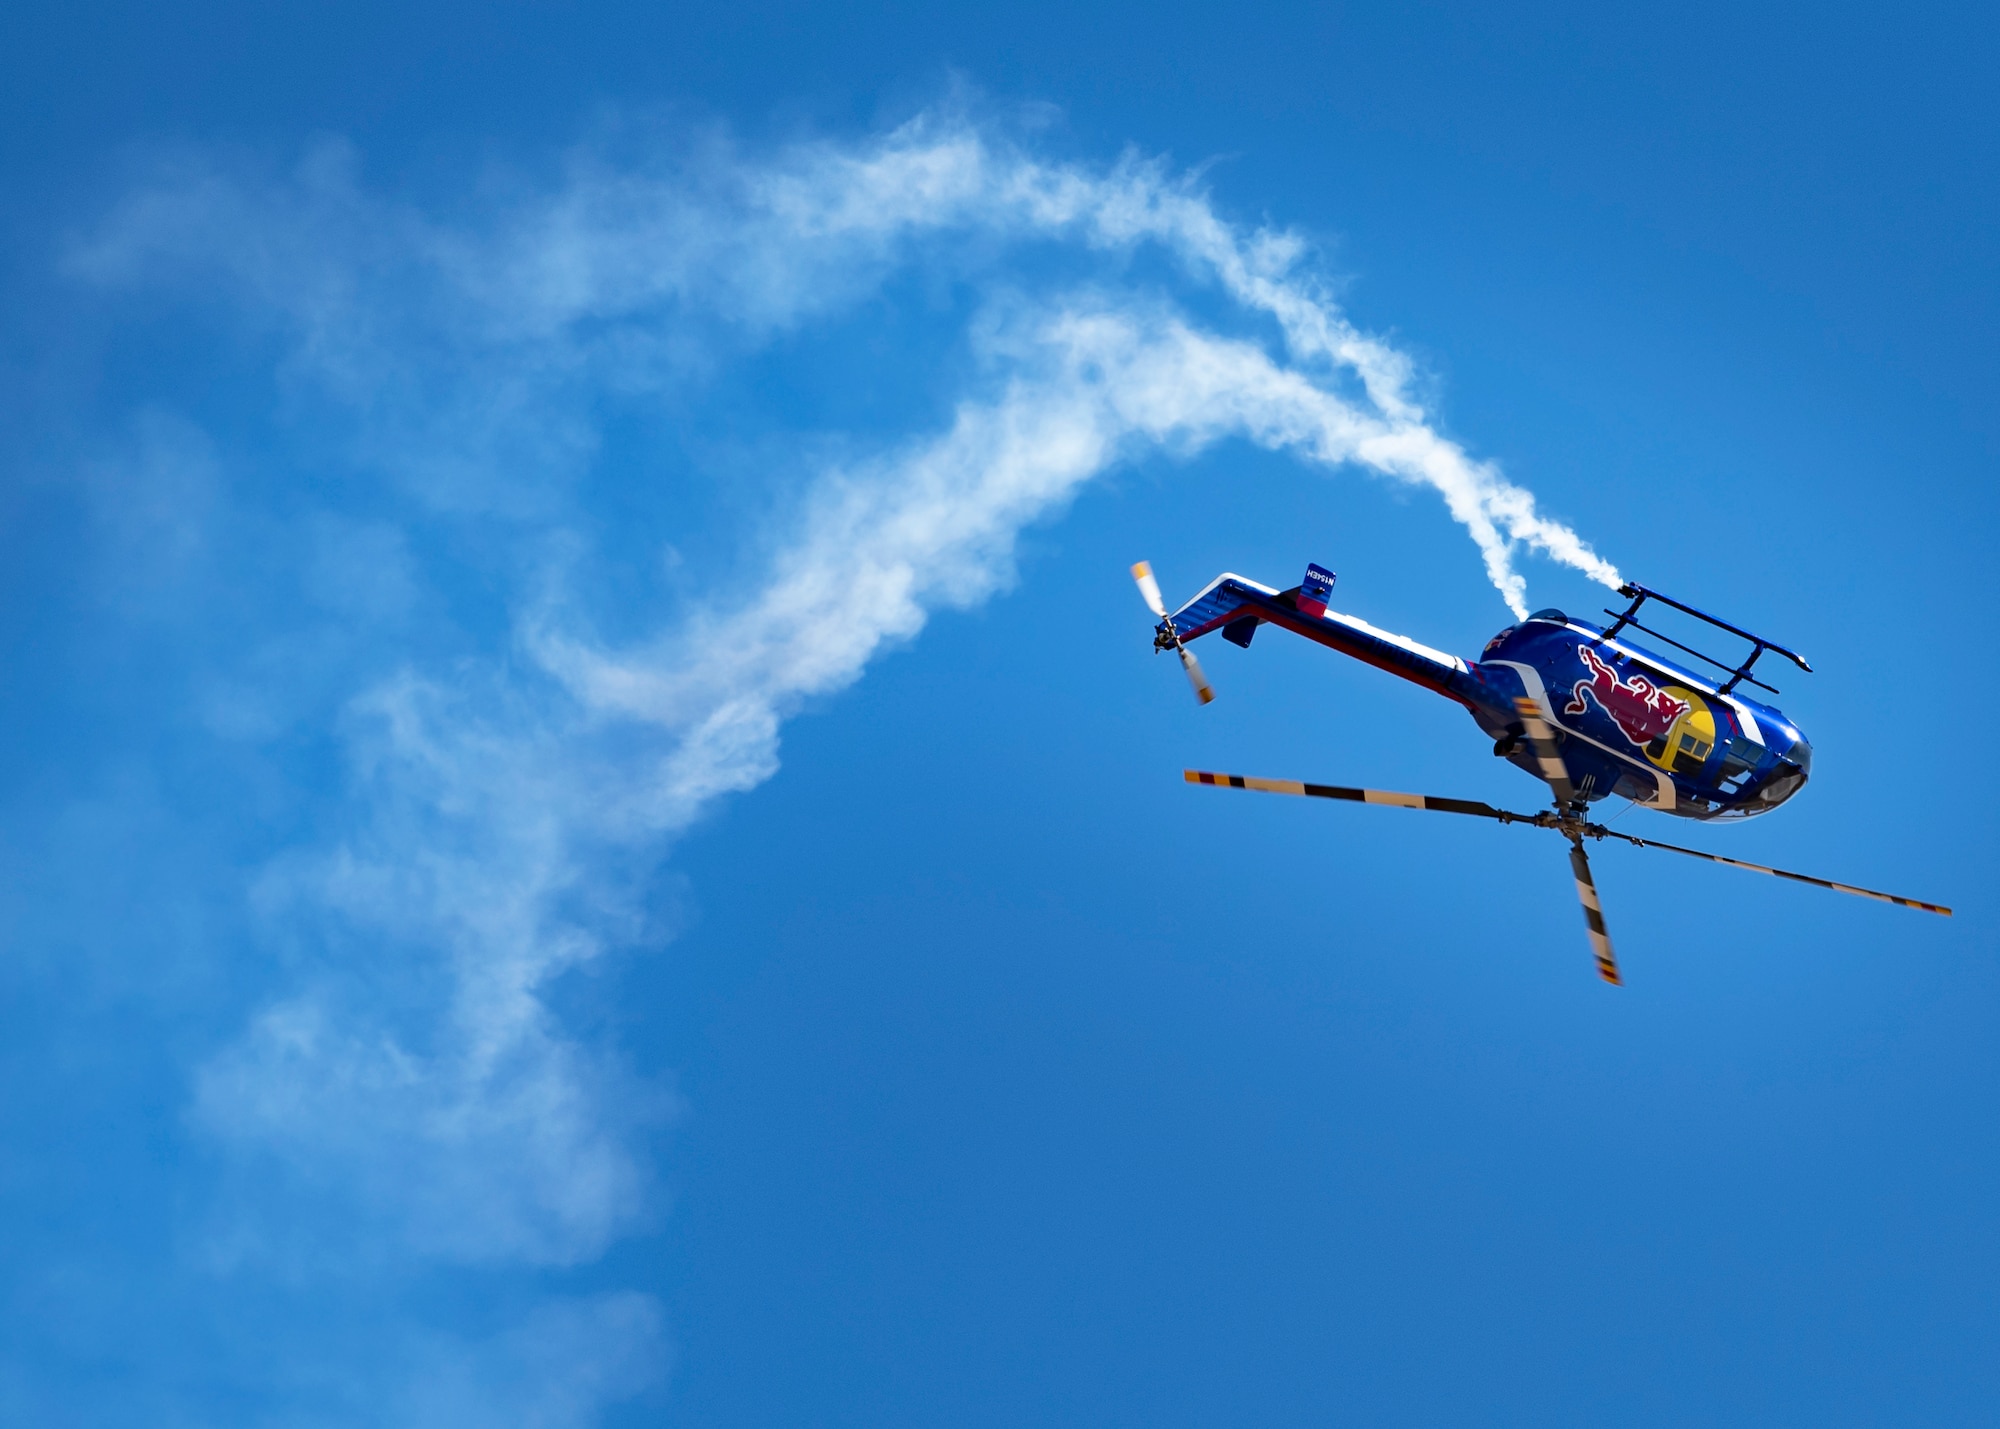 The Red Bull Air Force helicopter does a flip while performing at the Sheppard Air Force Base Guardians of Freedom Open House and Air Show at Sheppard AFB, Texas, Oct. 26, 2019. The Red Bull Air Force is a team assembled from accomplished and experienced aviation experts in the whole world. They specialize in highly coordinated aerial jump demonstrations and continually push the limits of human flight. They do base jumping, wingsuits, free flying, speed riding and more. (U.S. Air Force photo by Airman 1st Class Pedro Tenorio)